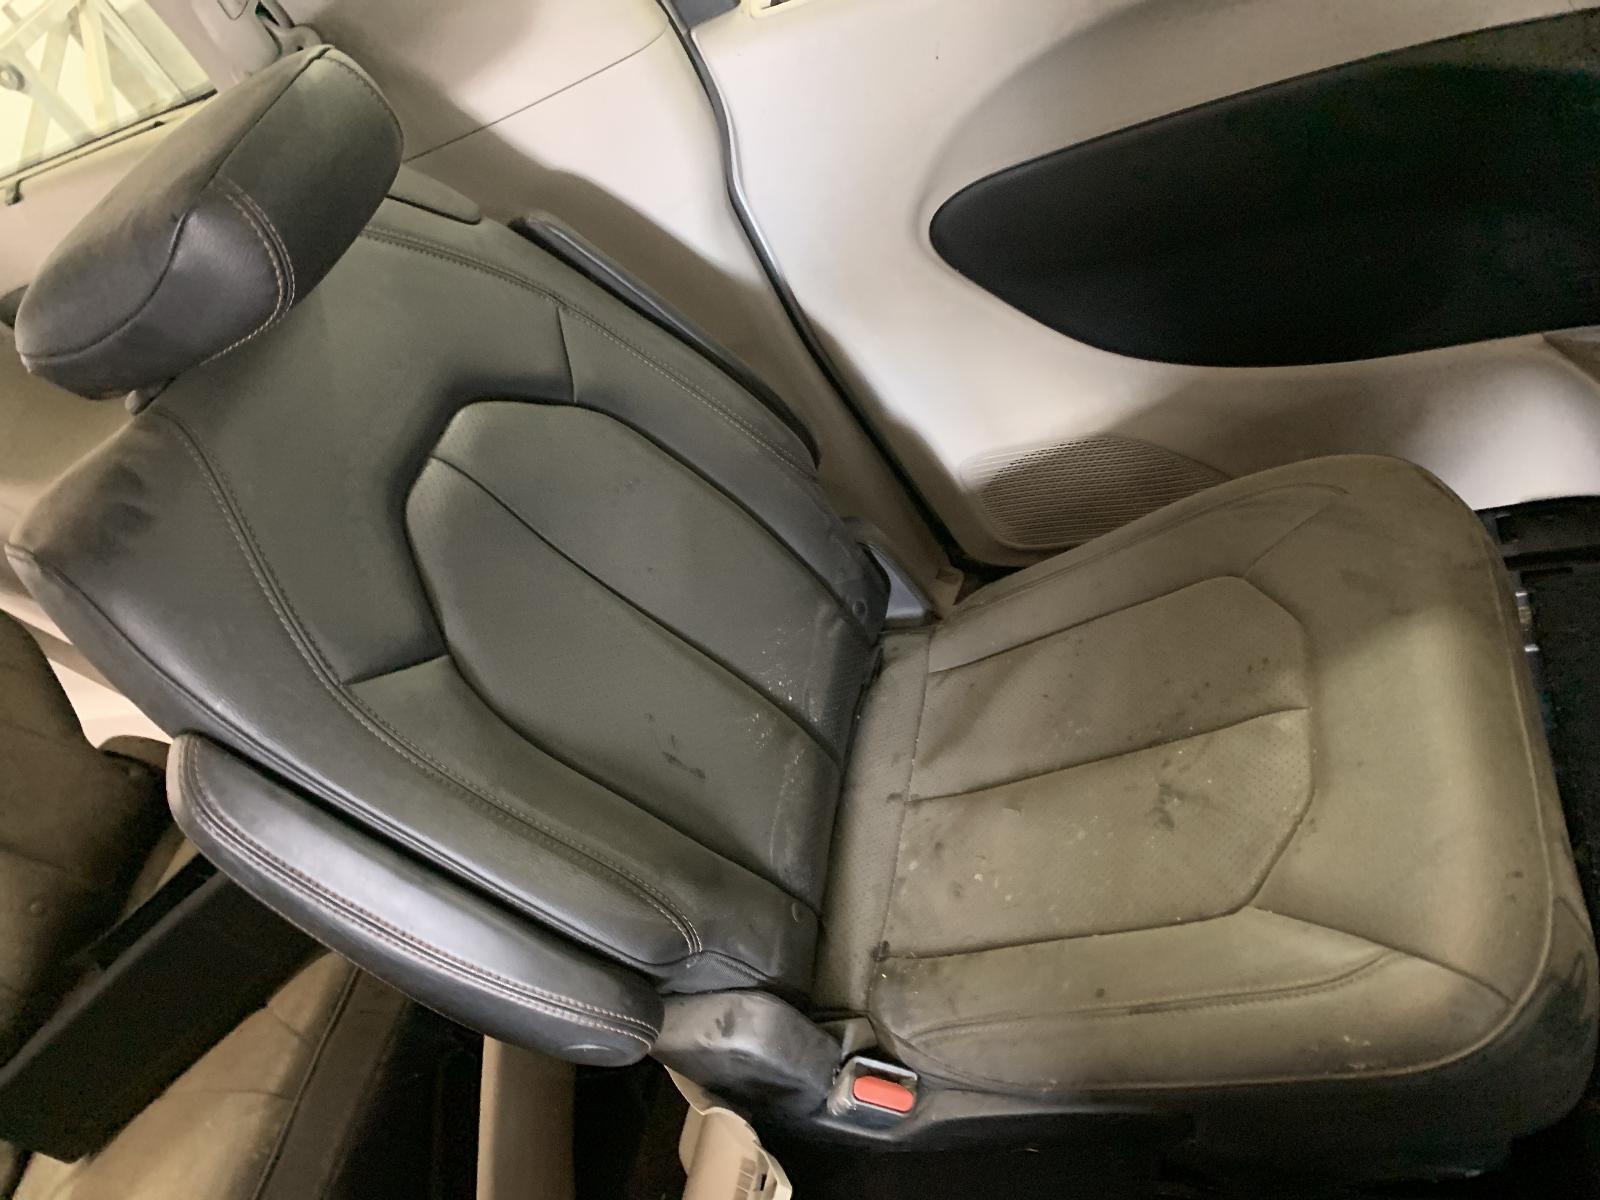 Used Seat fits: 2019 Chrysler Pacifica Seat Rear Grade A